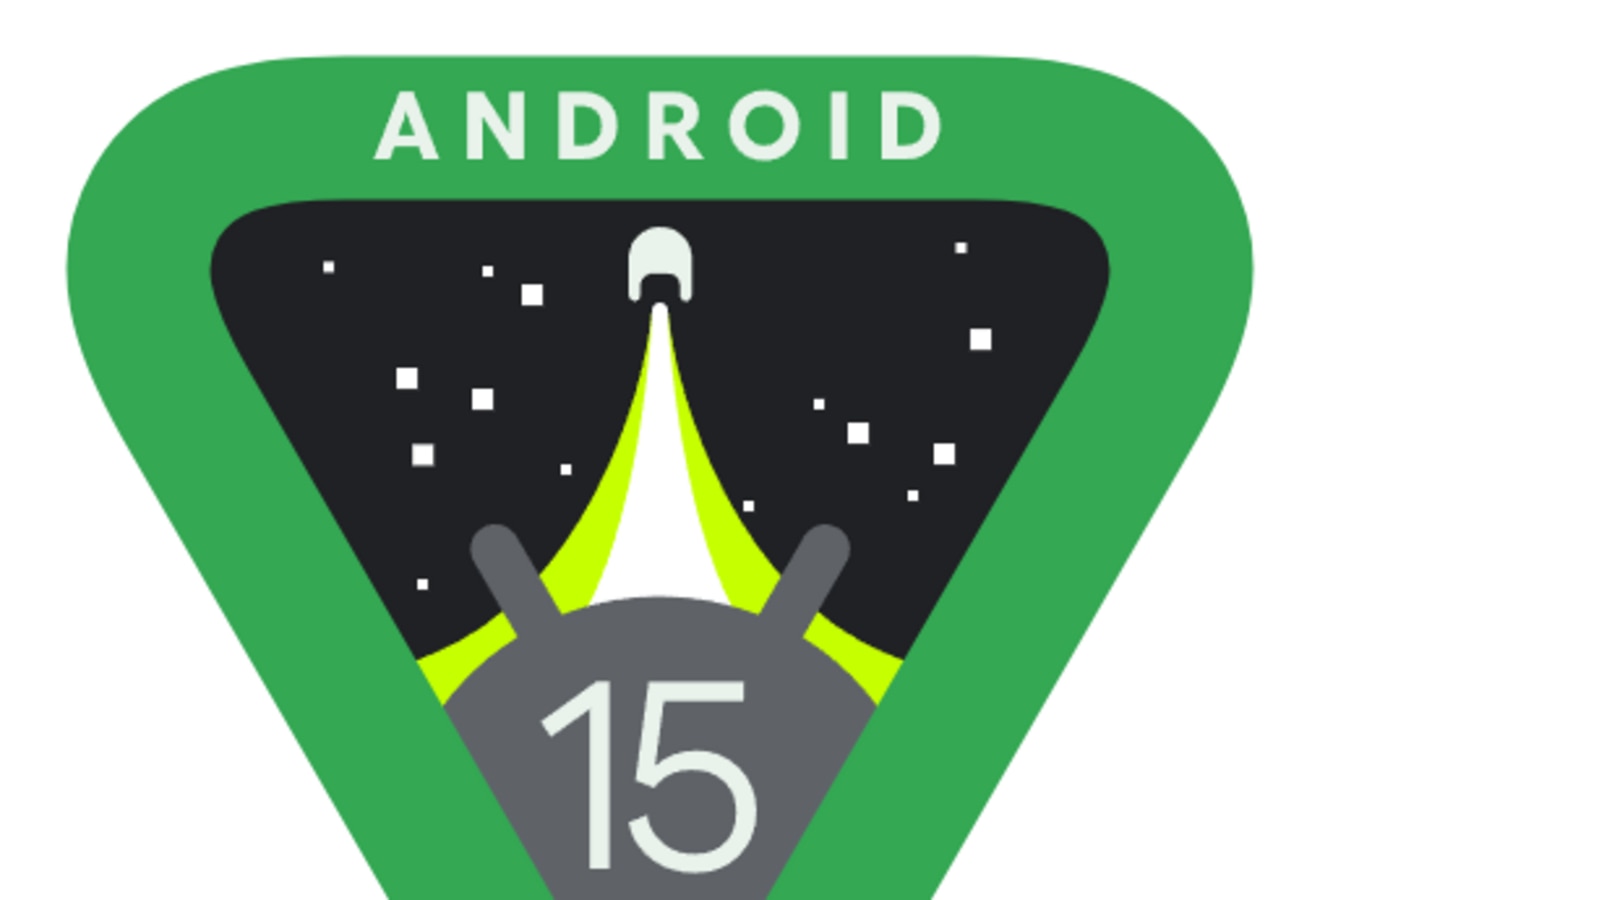 Android 15 Beta 1 update released: Check eligible devices and how to download